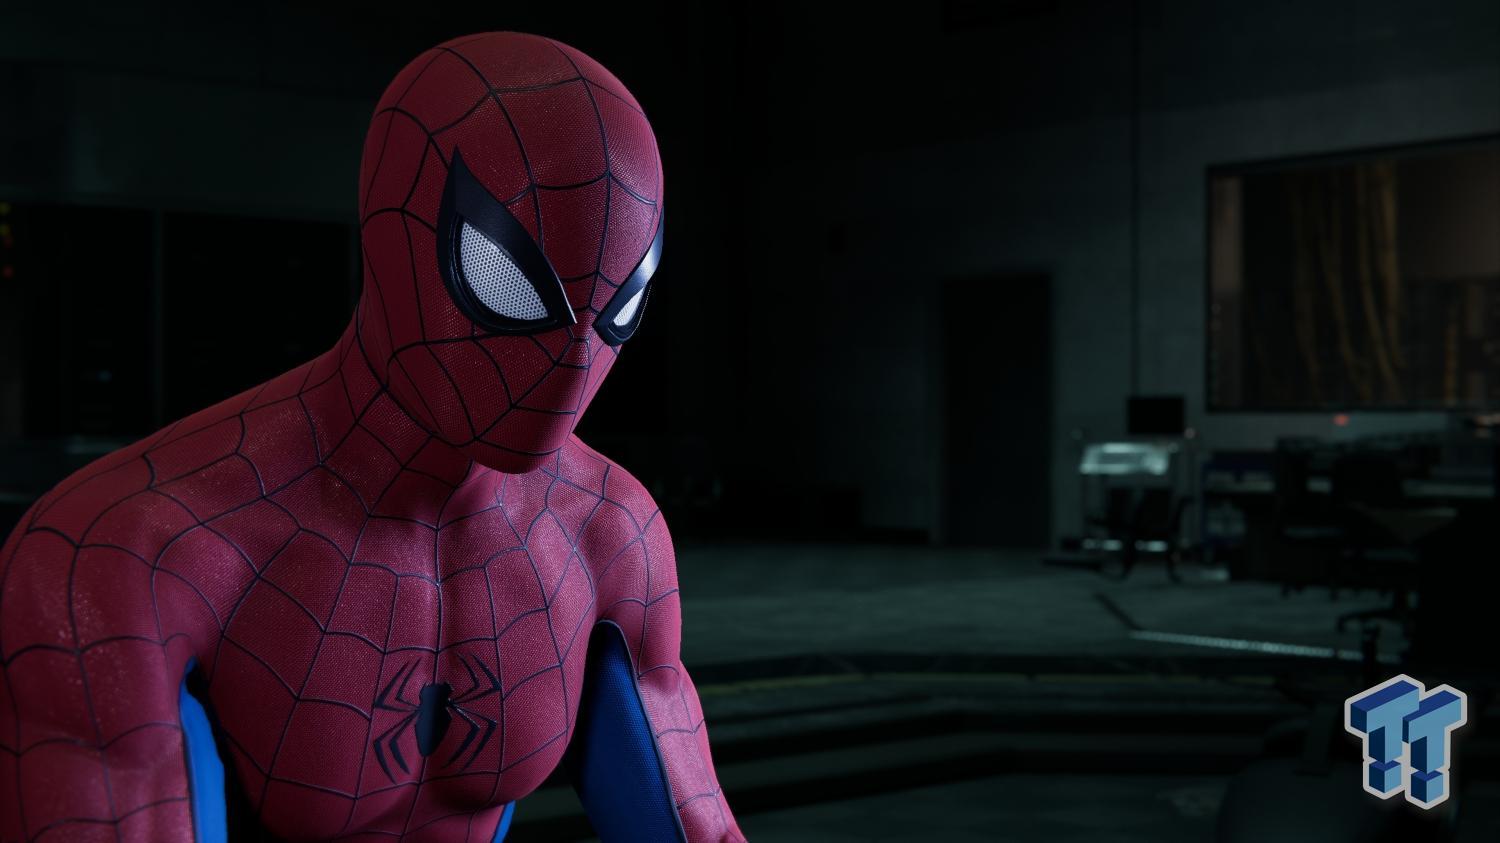 Marvel's Spider-Man Remastered: substantial enhancements vs PS4 Pro - plus  ray tracing at 60fps